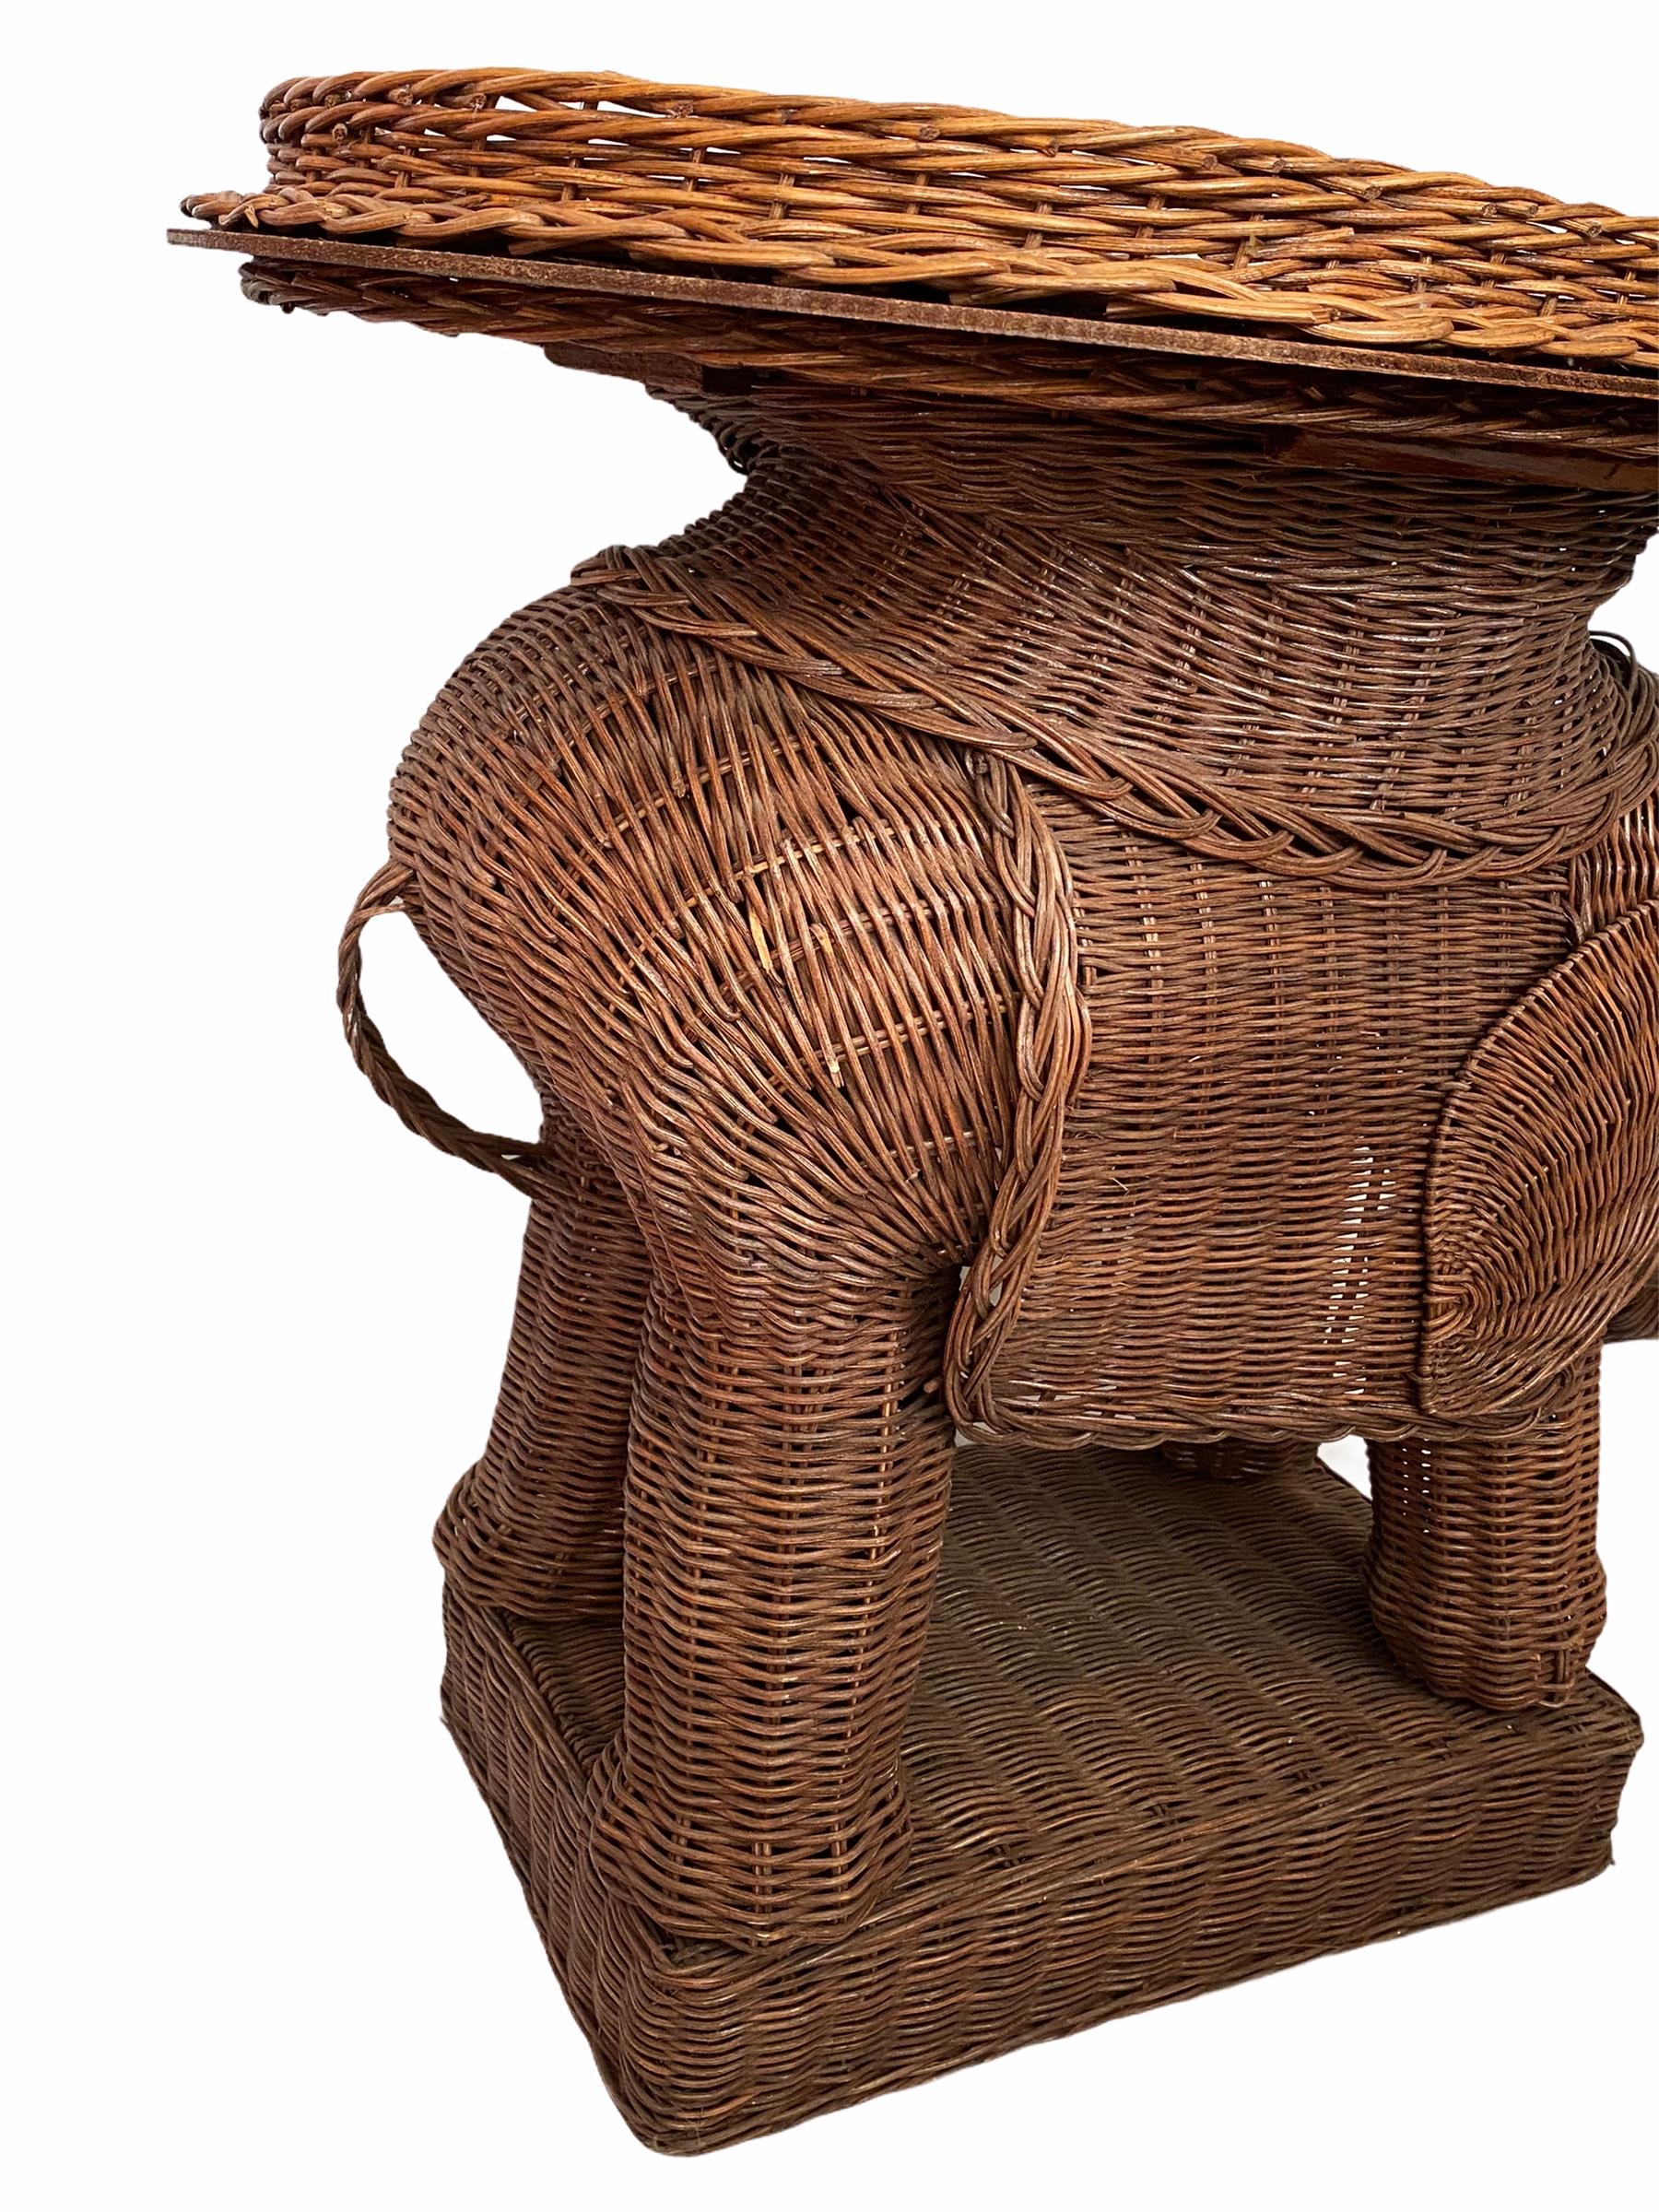 French Stunning Rattan Wicker Elephant Side Table with Tray, France, 1960s